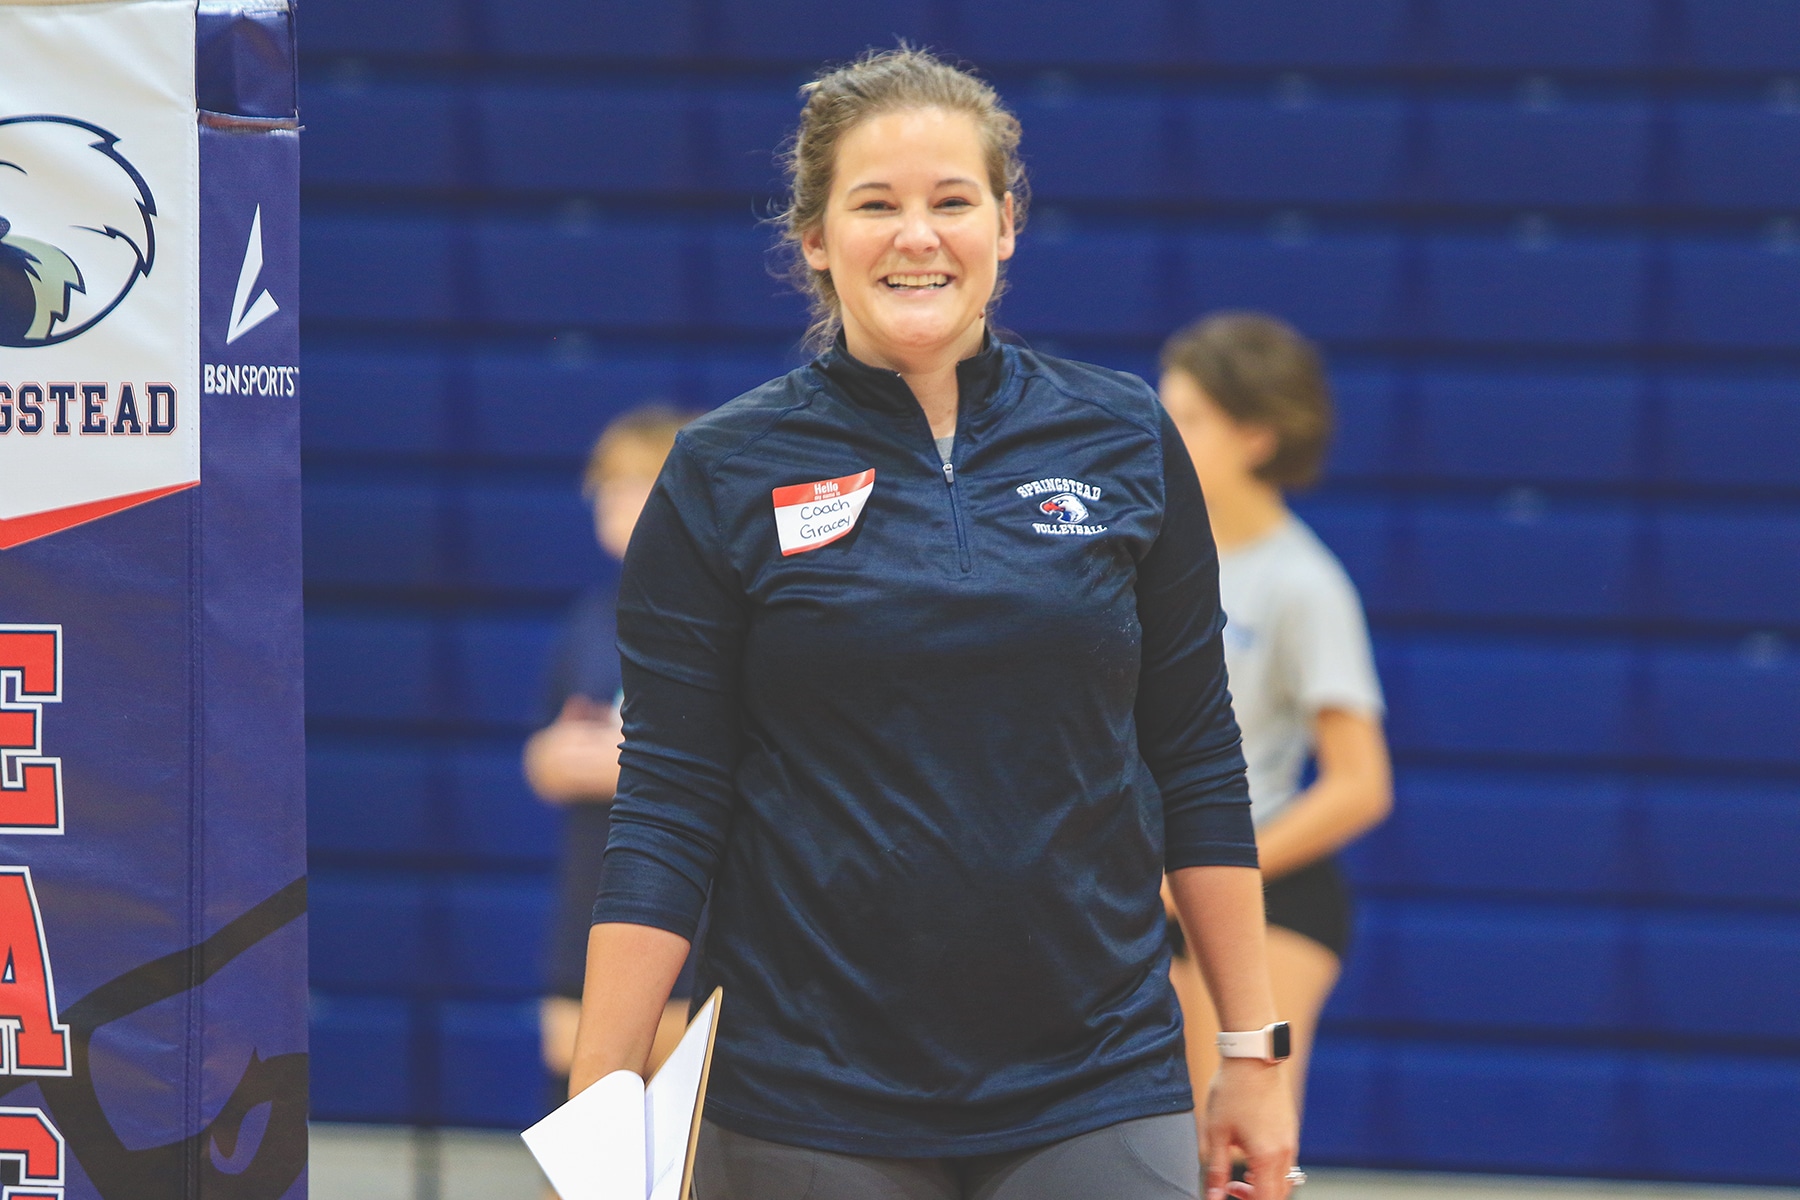  Andrea Gracey is going into her third season as Springstead Volleyball Coach. She is focused on rebuilding her team and taking baby steps to accomplish that.